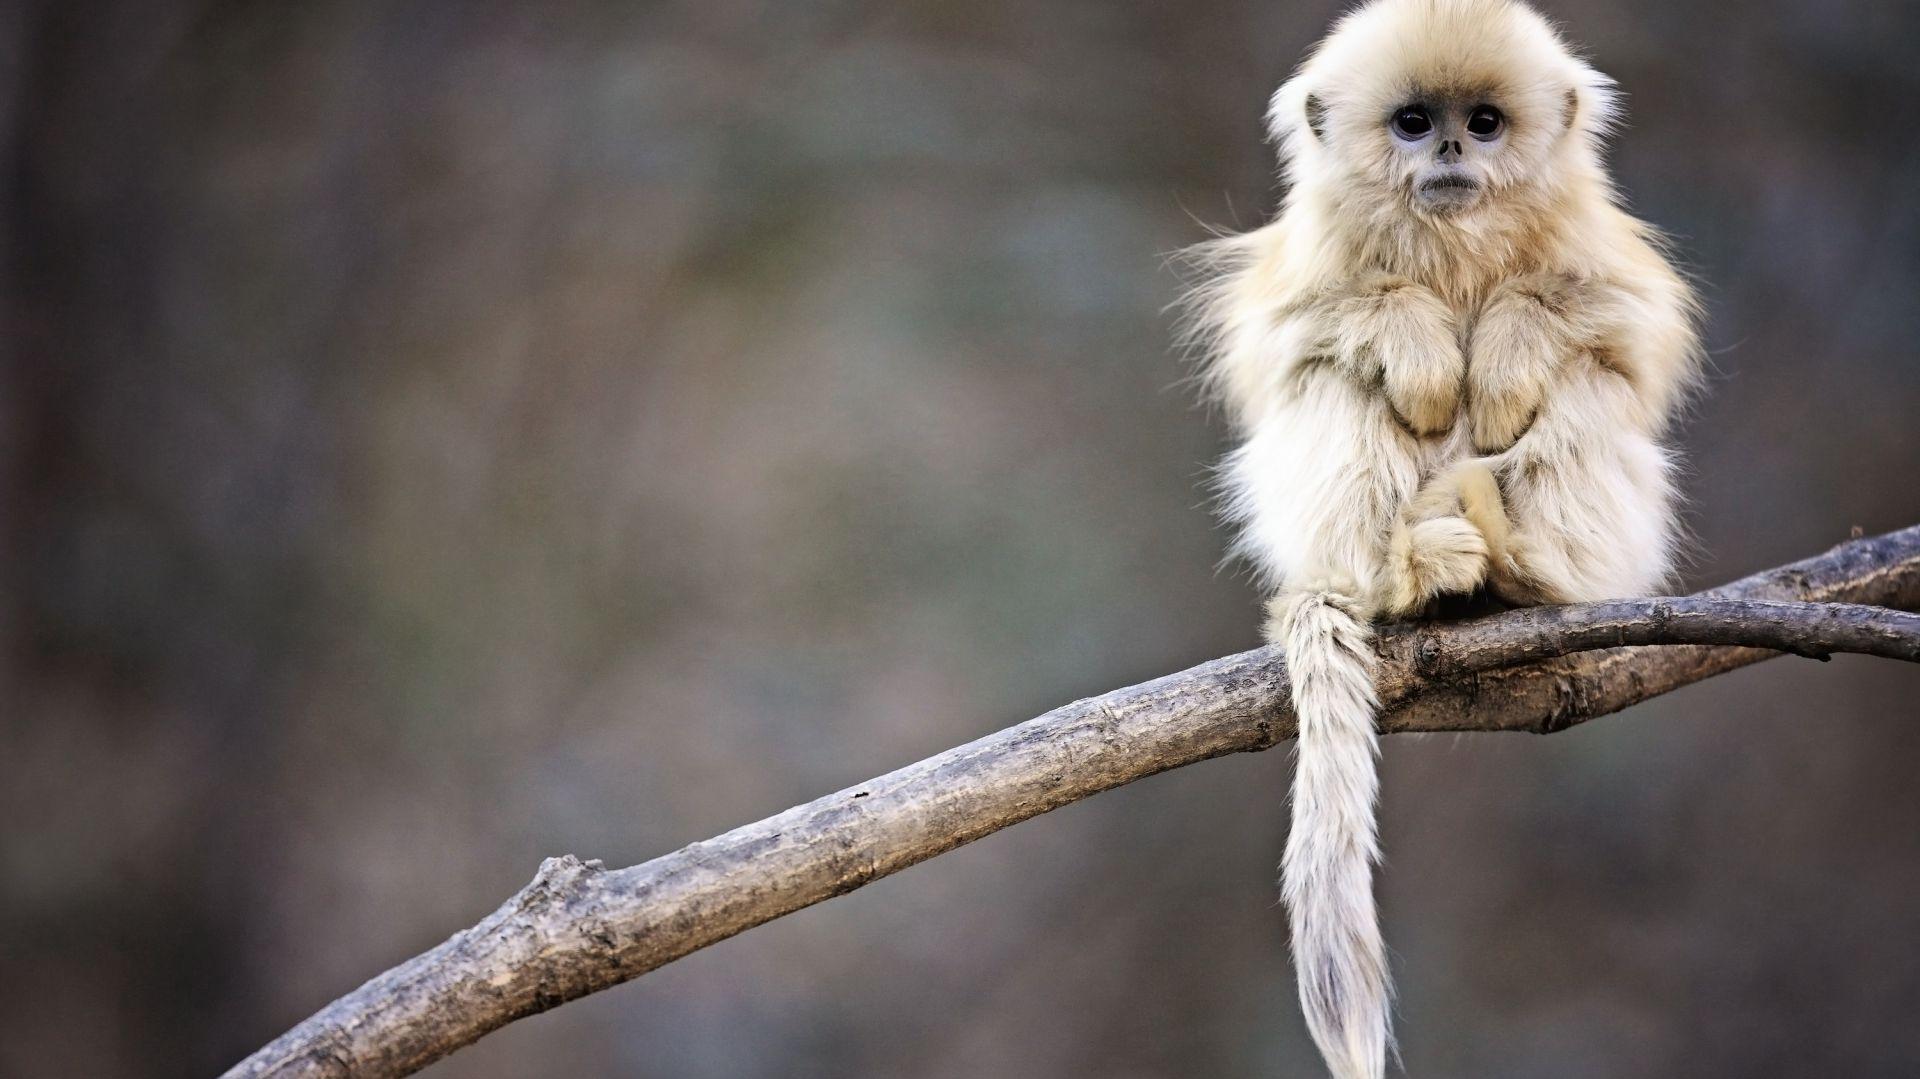 WallpapersHome on Snub nosed monkey Animals